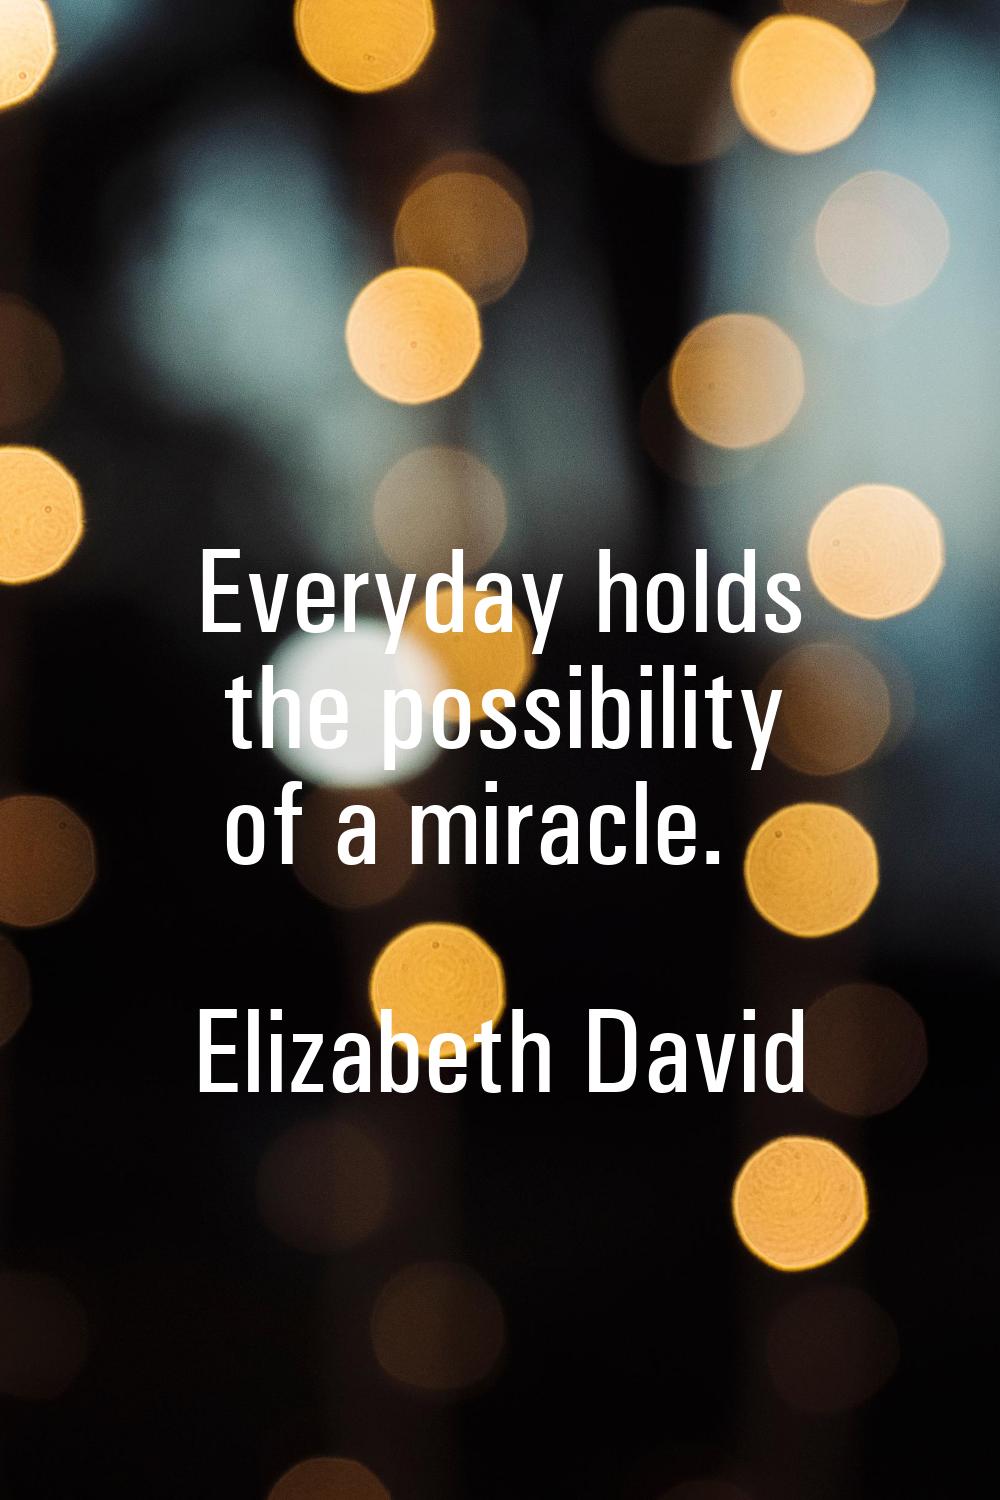 Everyday holds the possibility of a miracle.